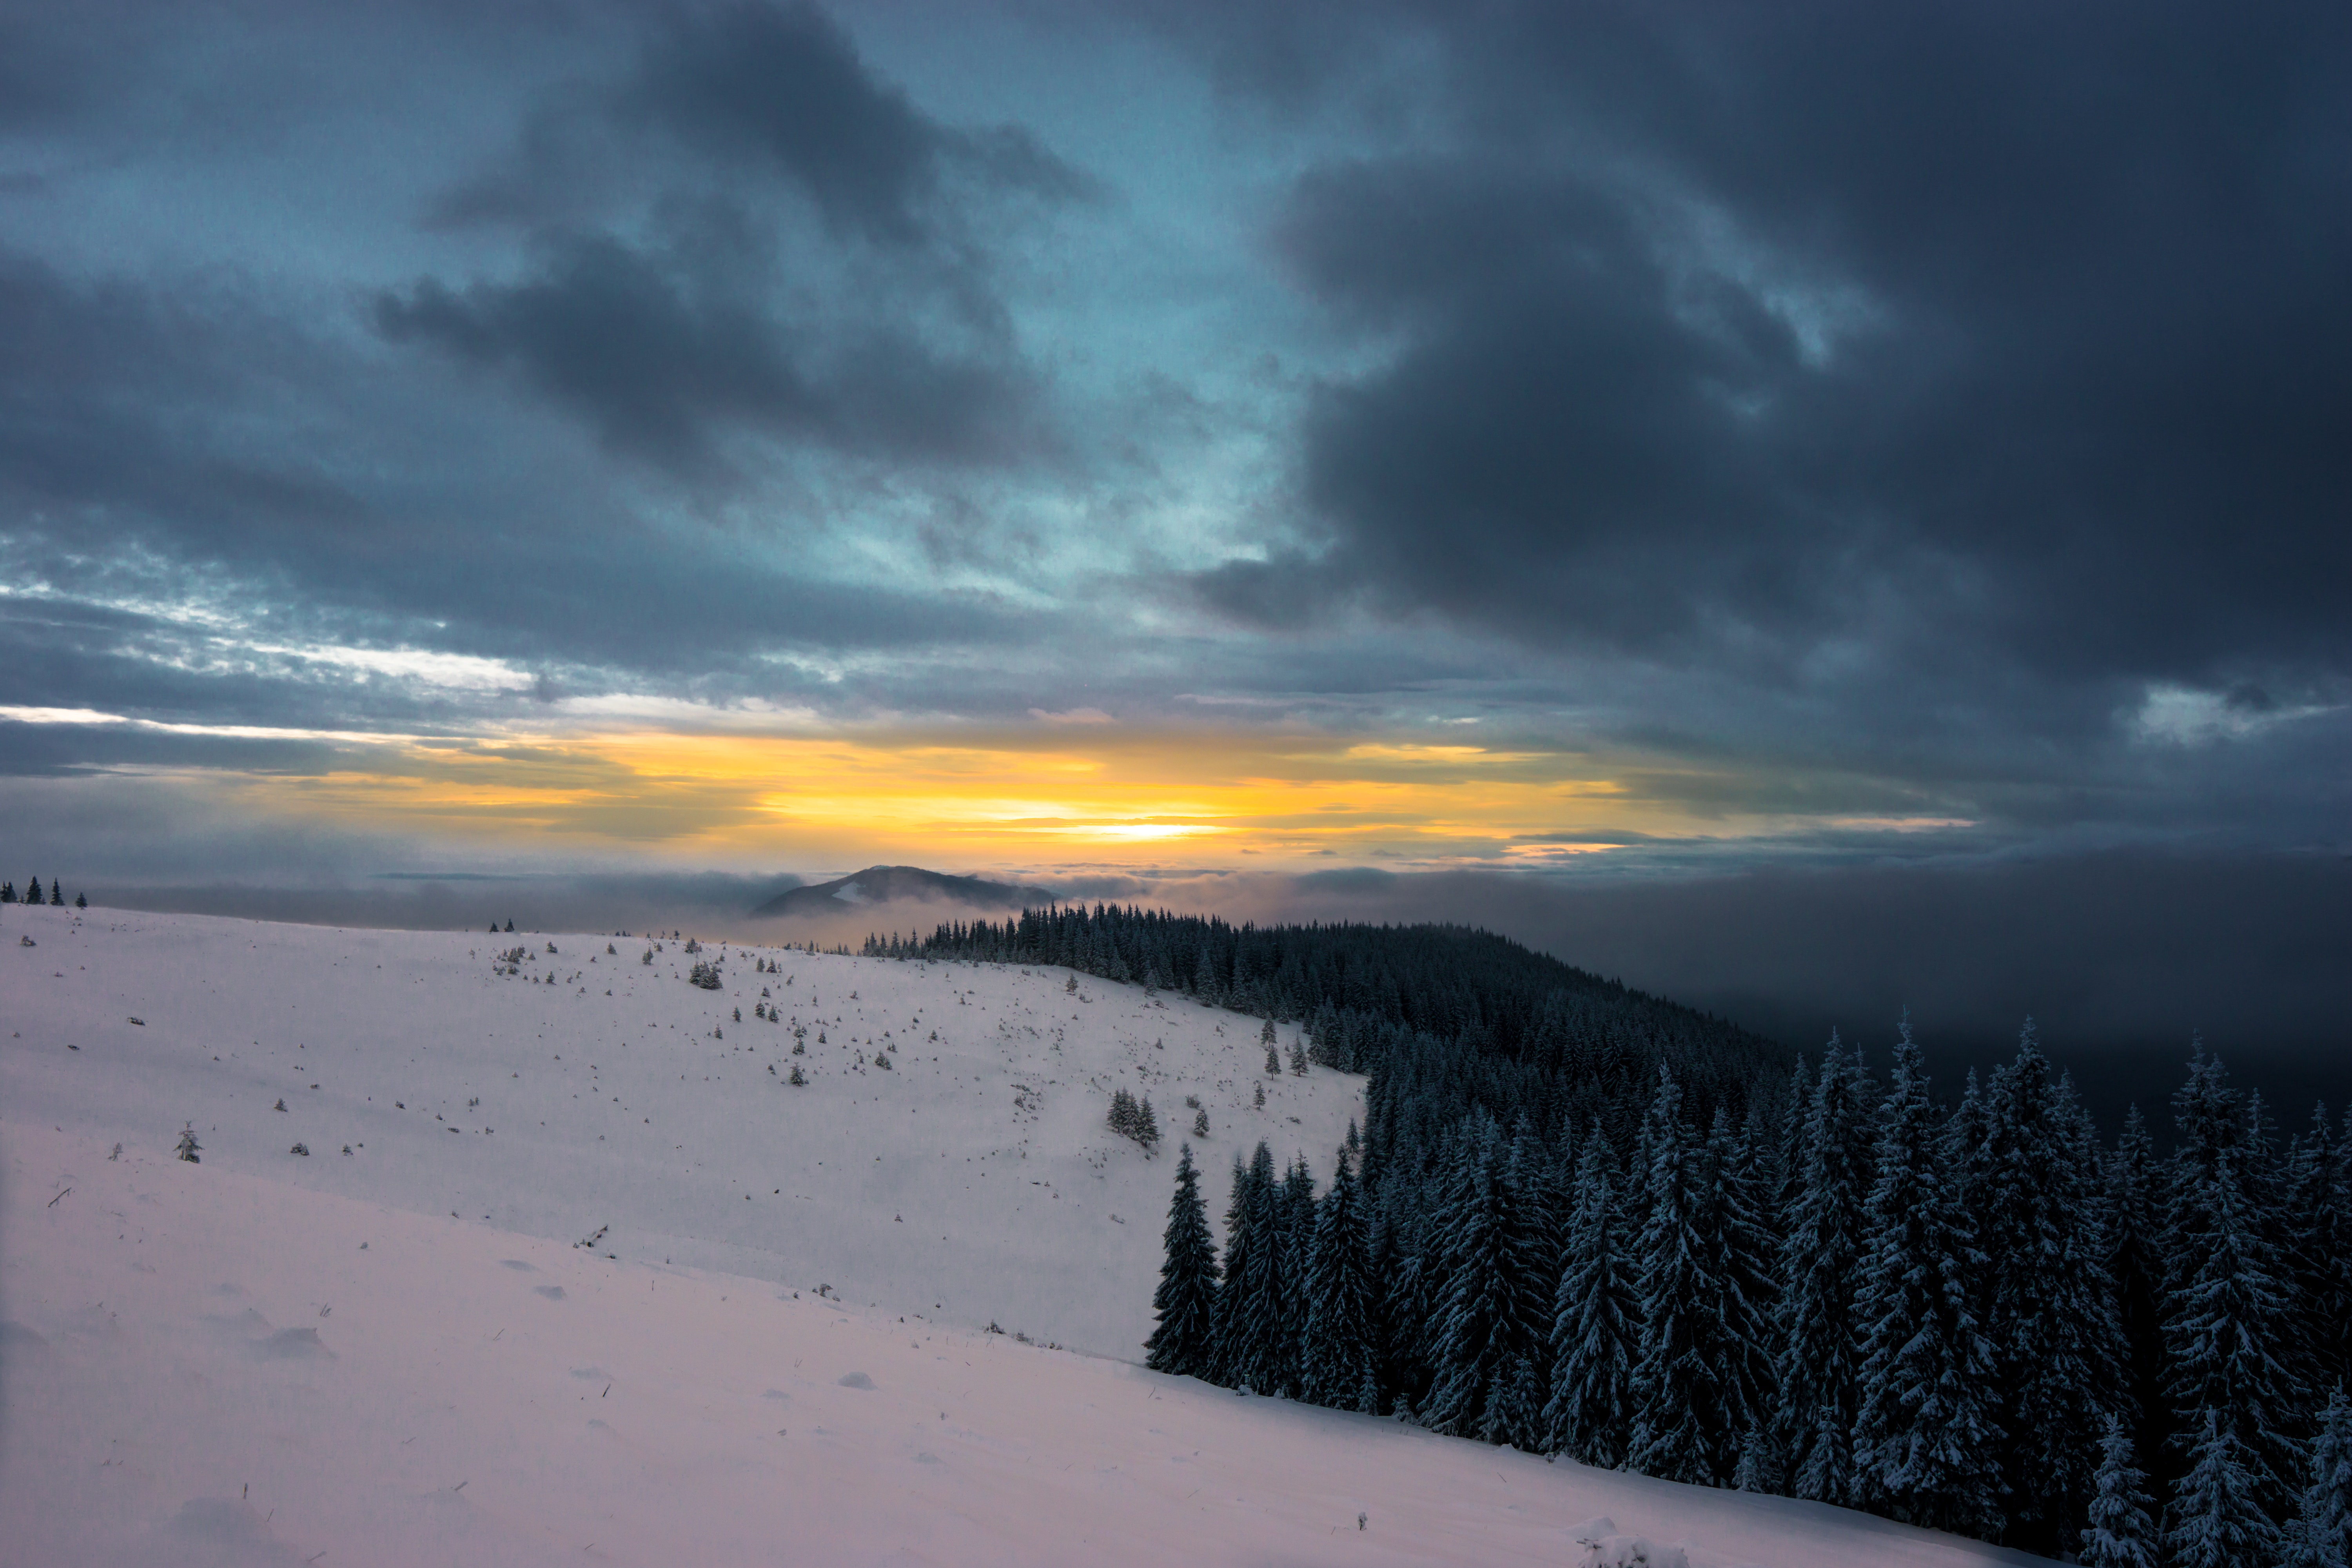 Download PC Wallpaper snow, nature, mountains, winter, sunset, sky, clouds, forest, snow covered, snowbound